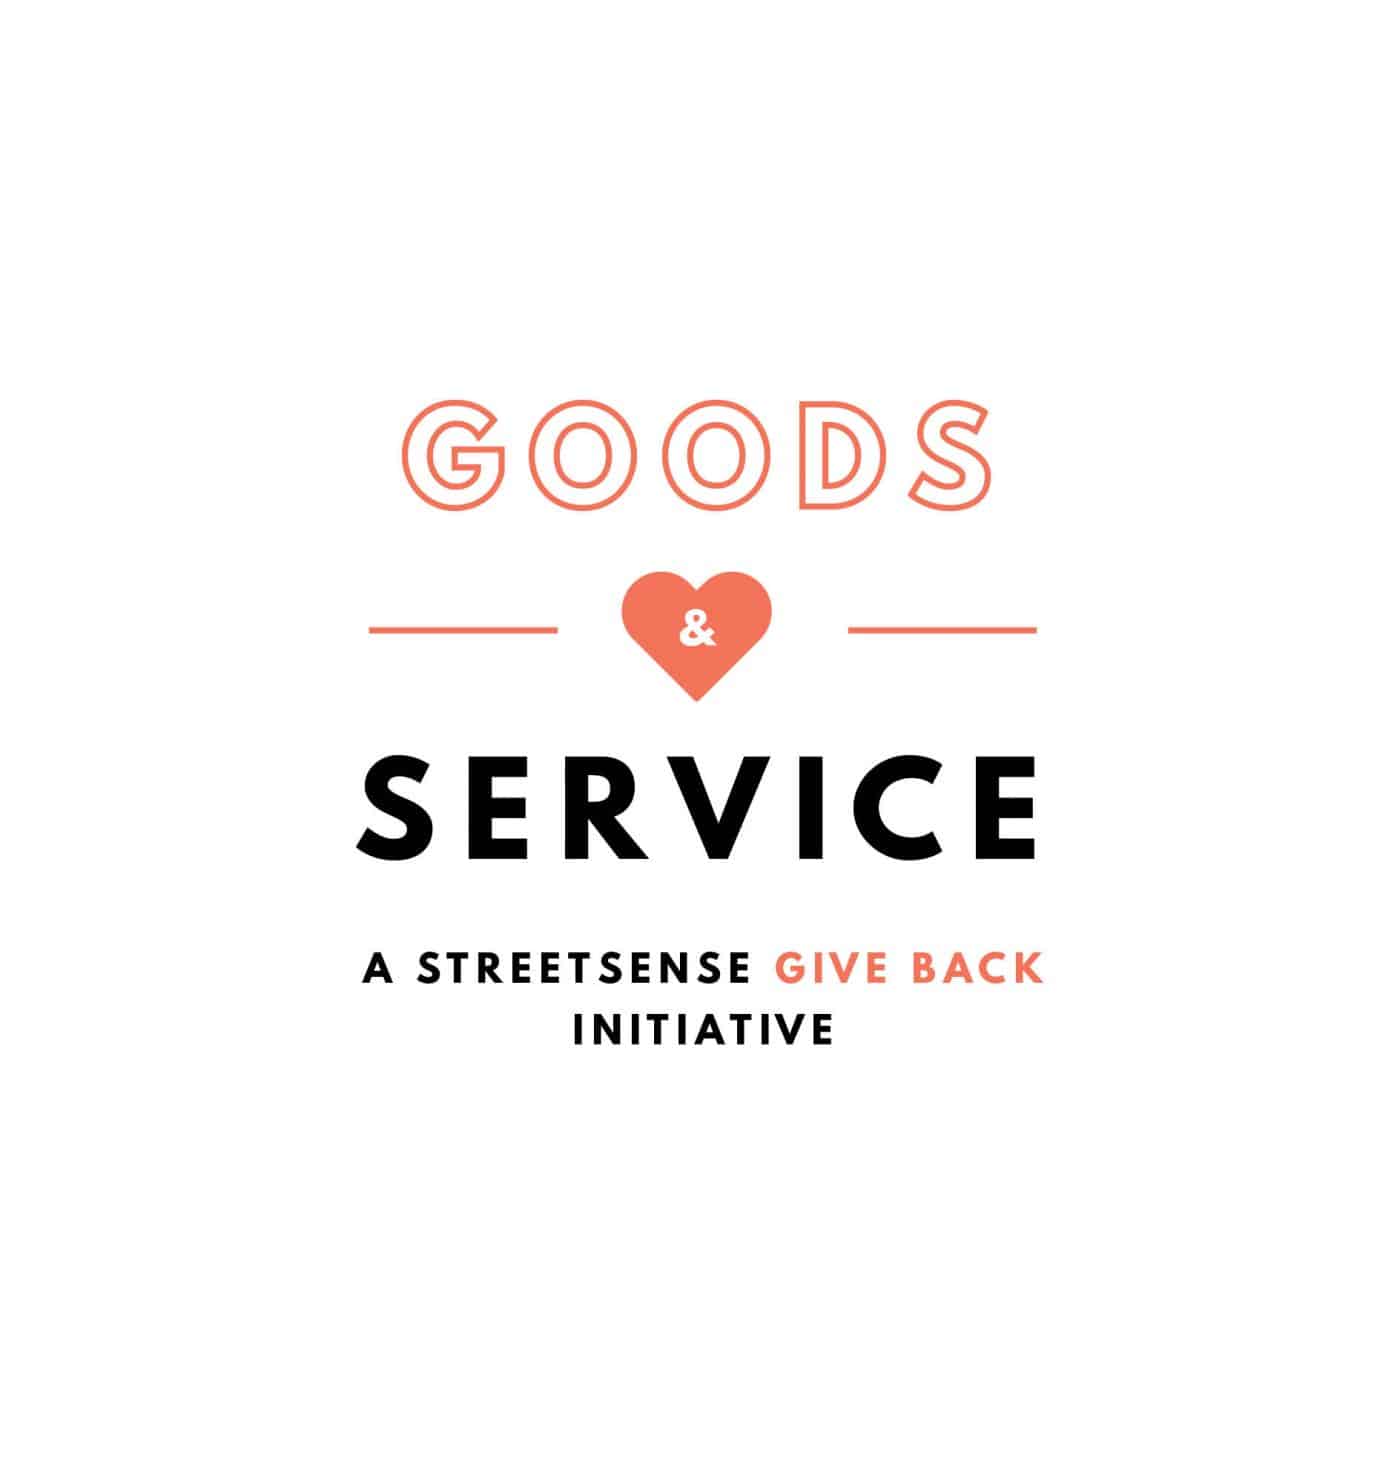 Graphic with the words "Goods & Service - A Streetsense Give Back Initiative